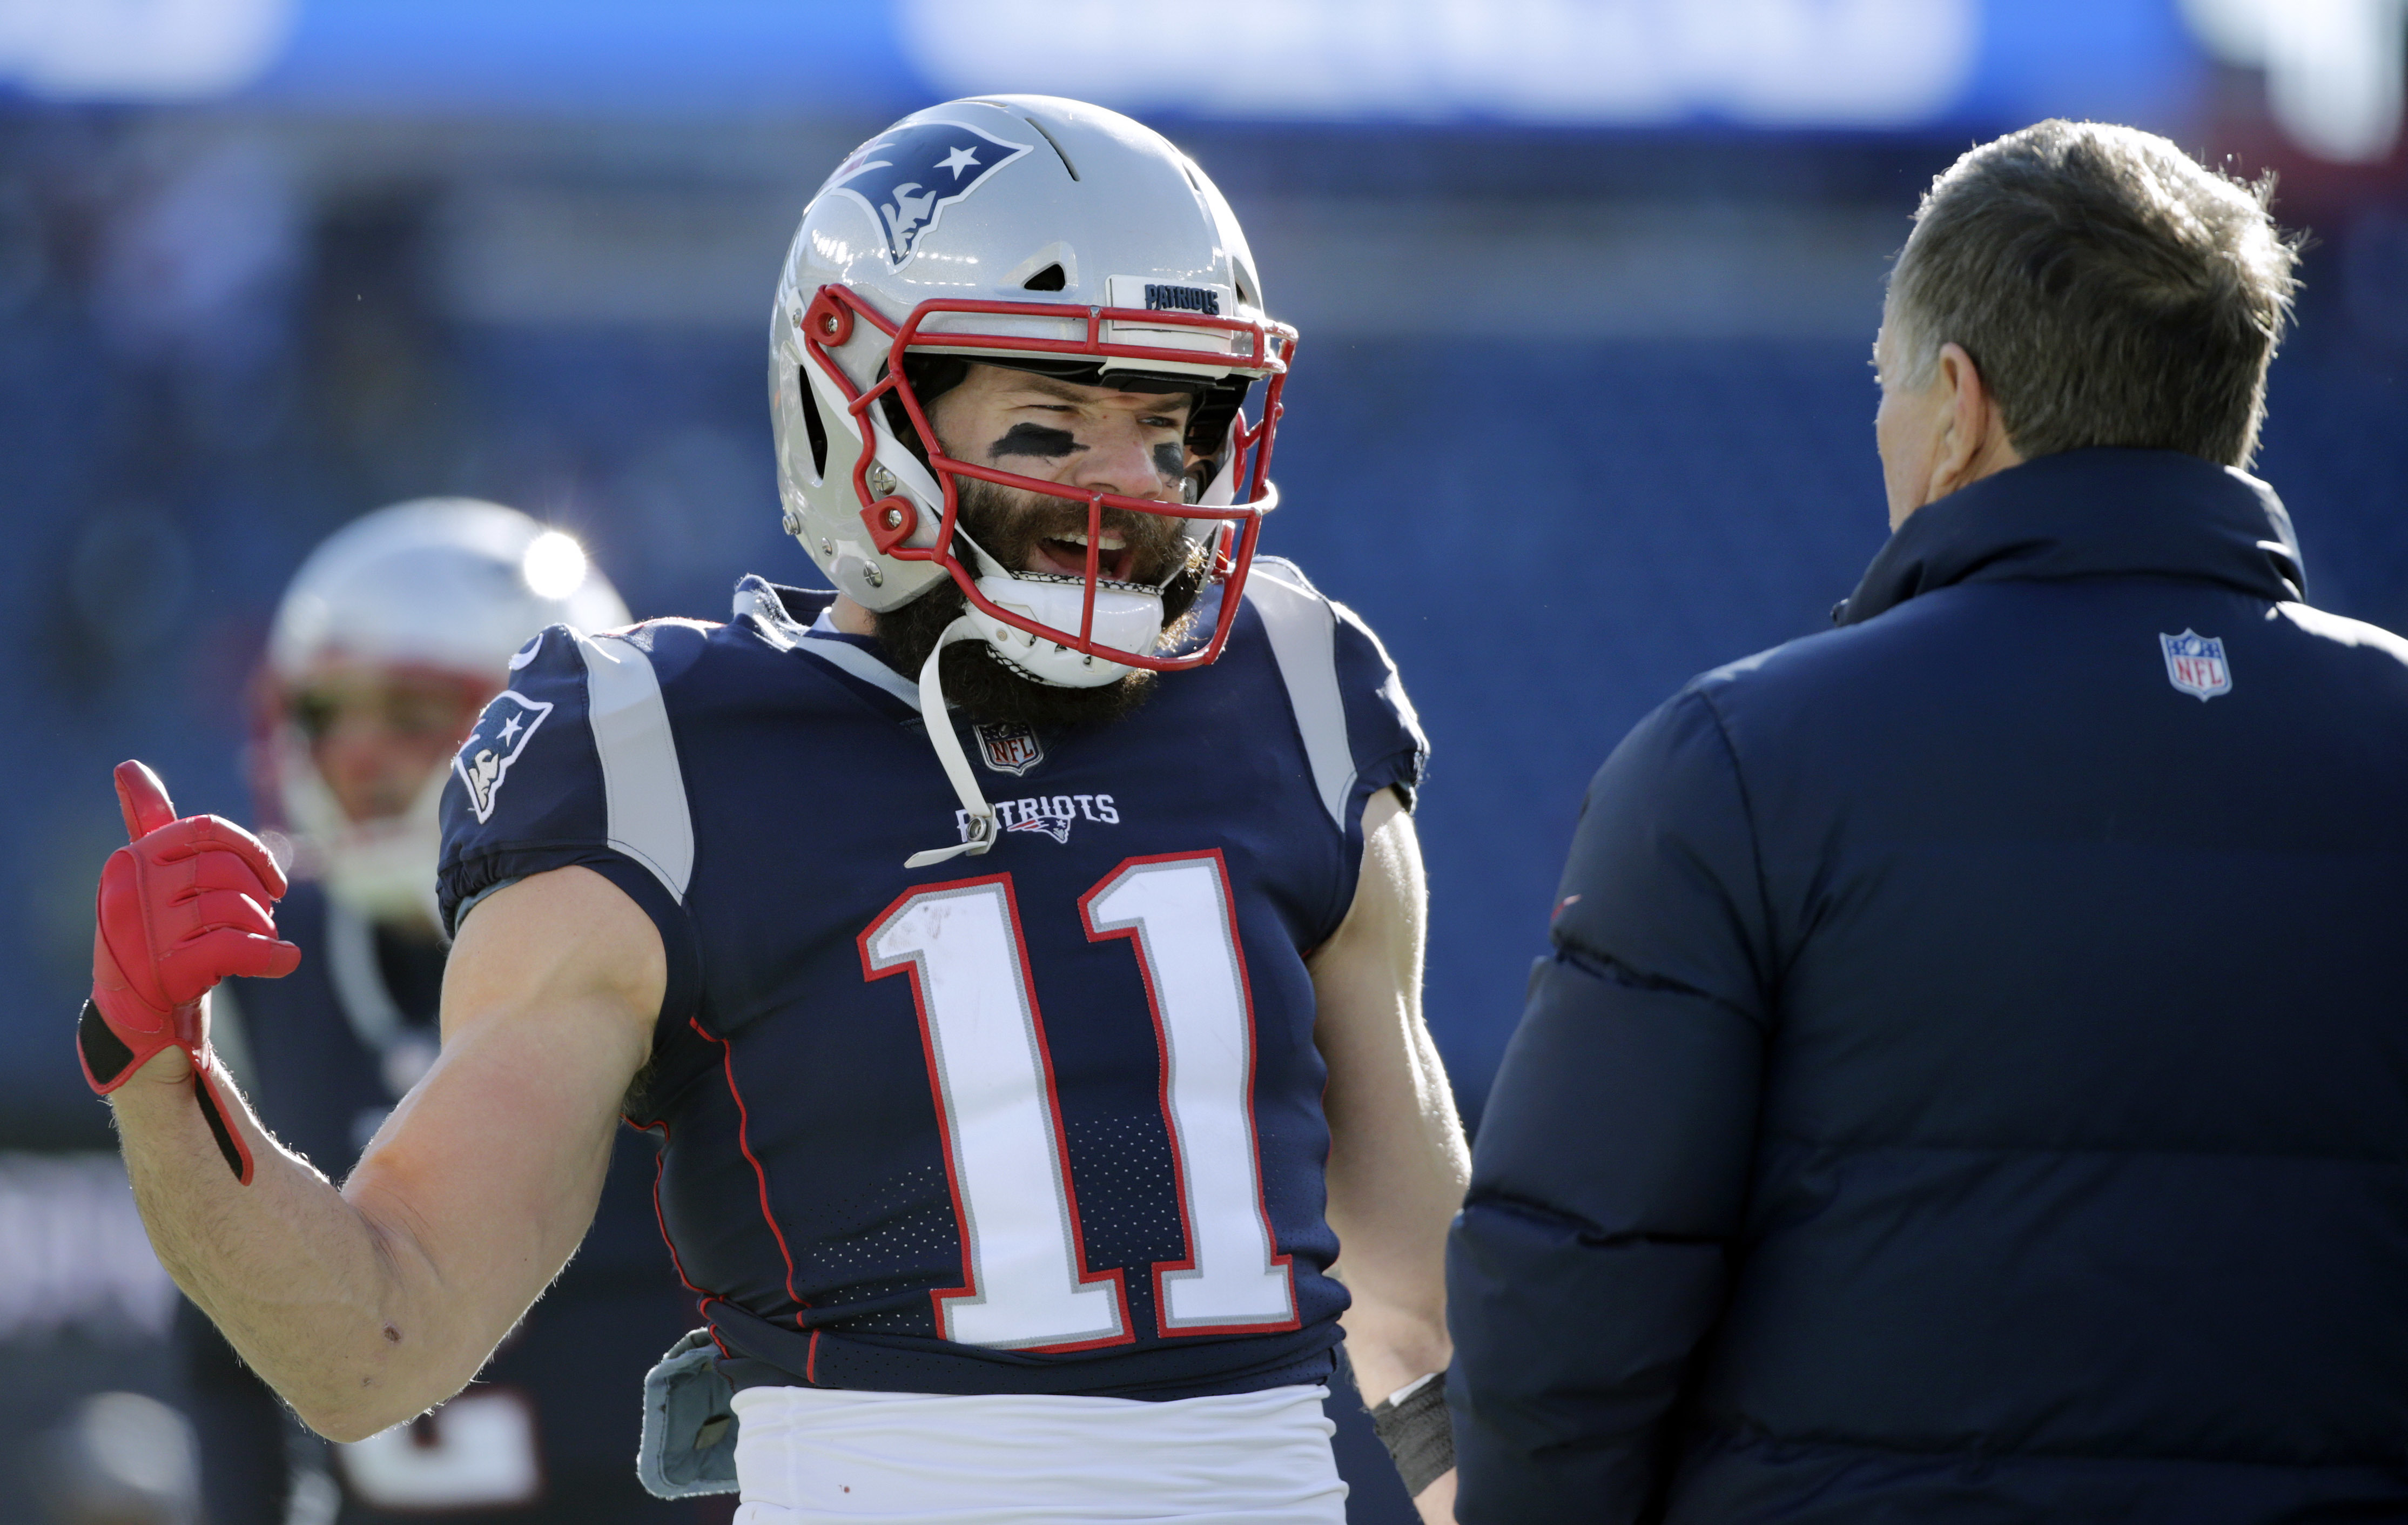 Julian Edelman injury: Here's who New England Patriots WRs could